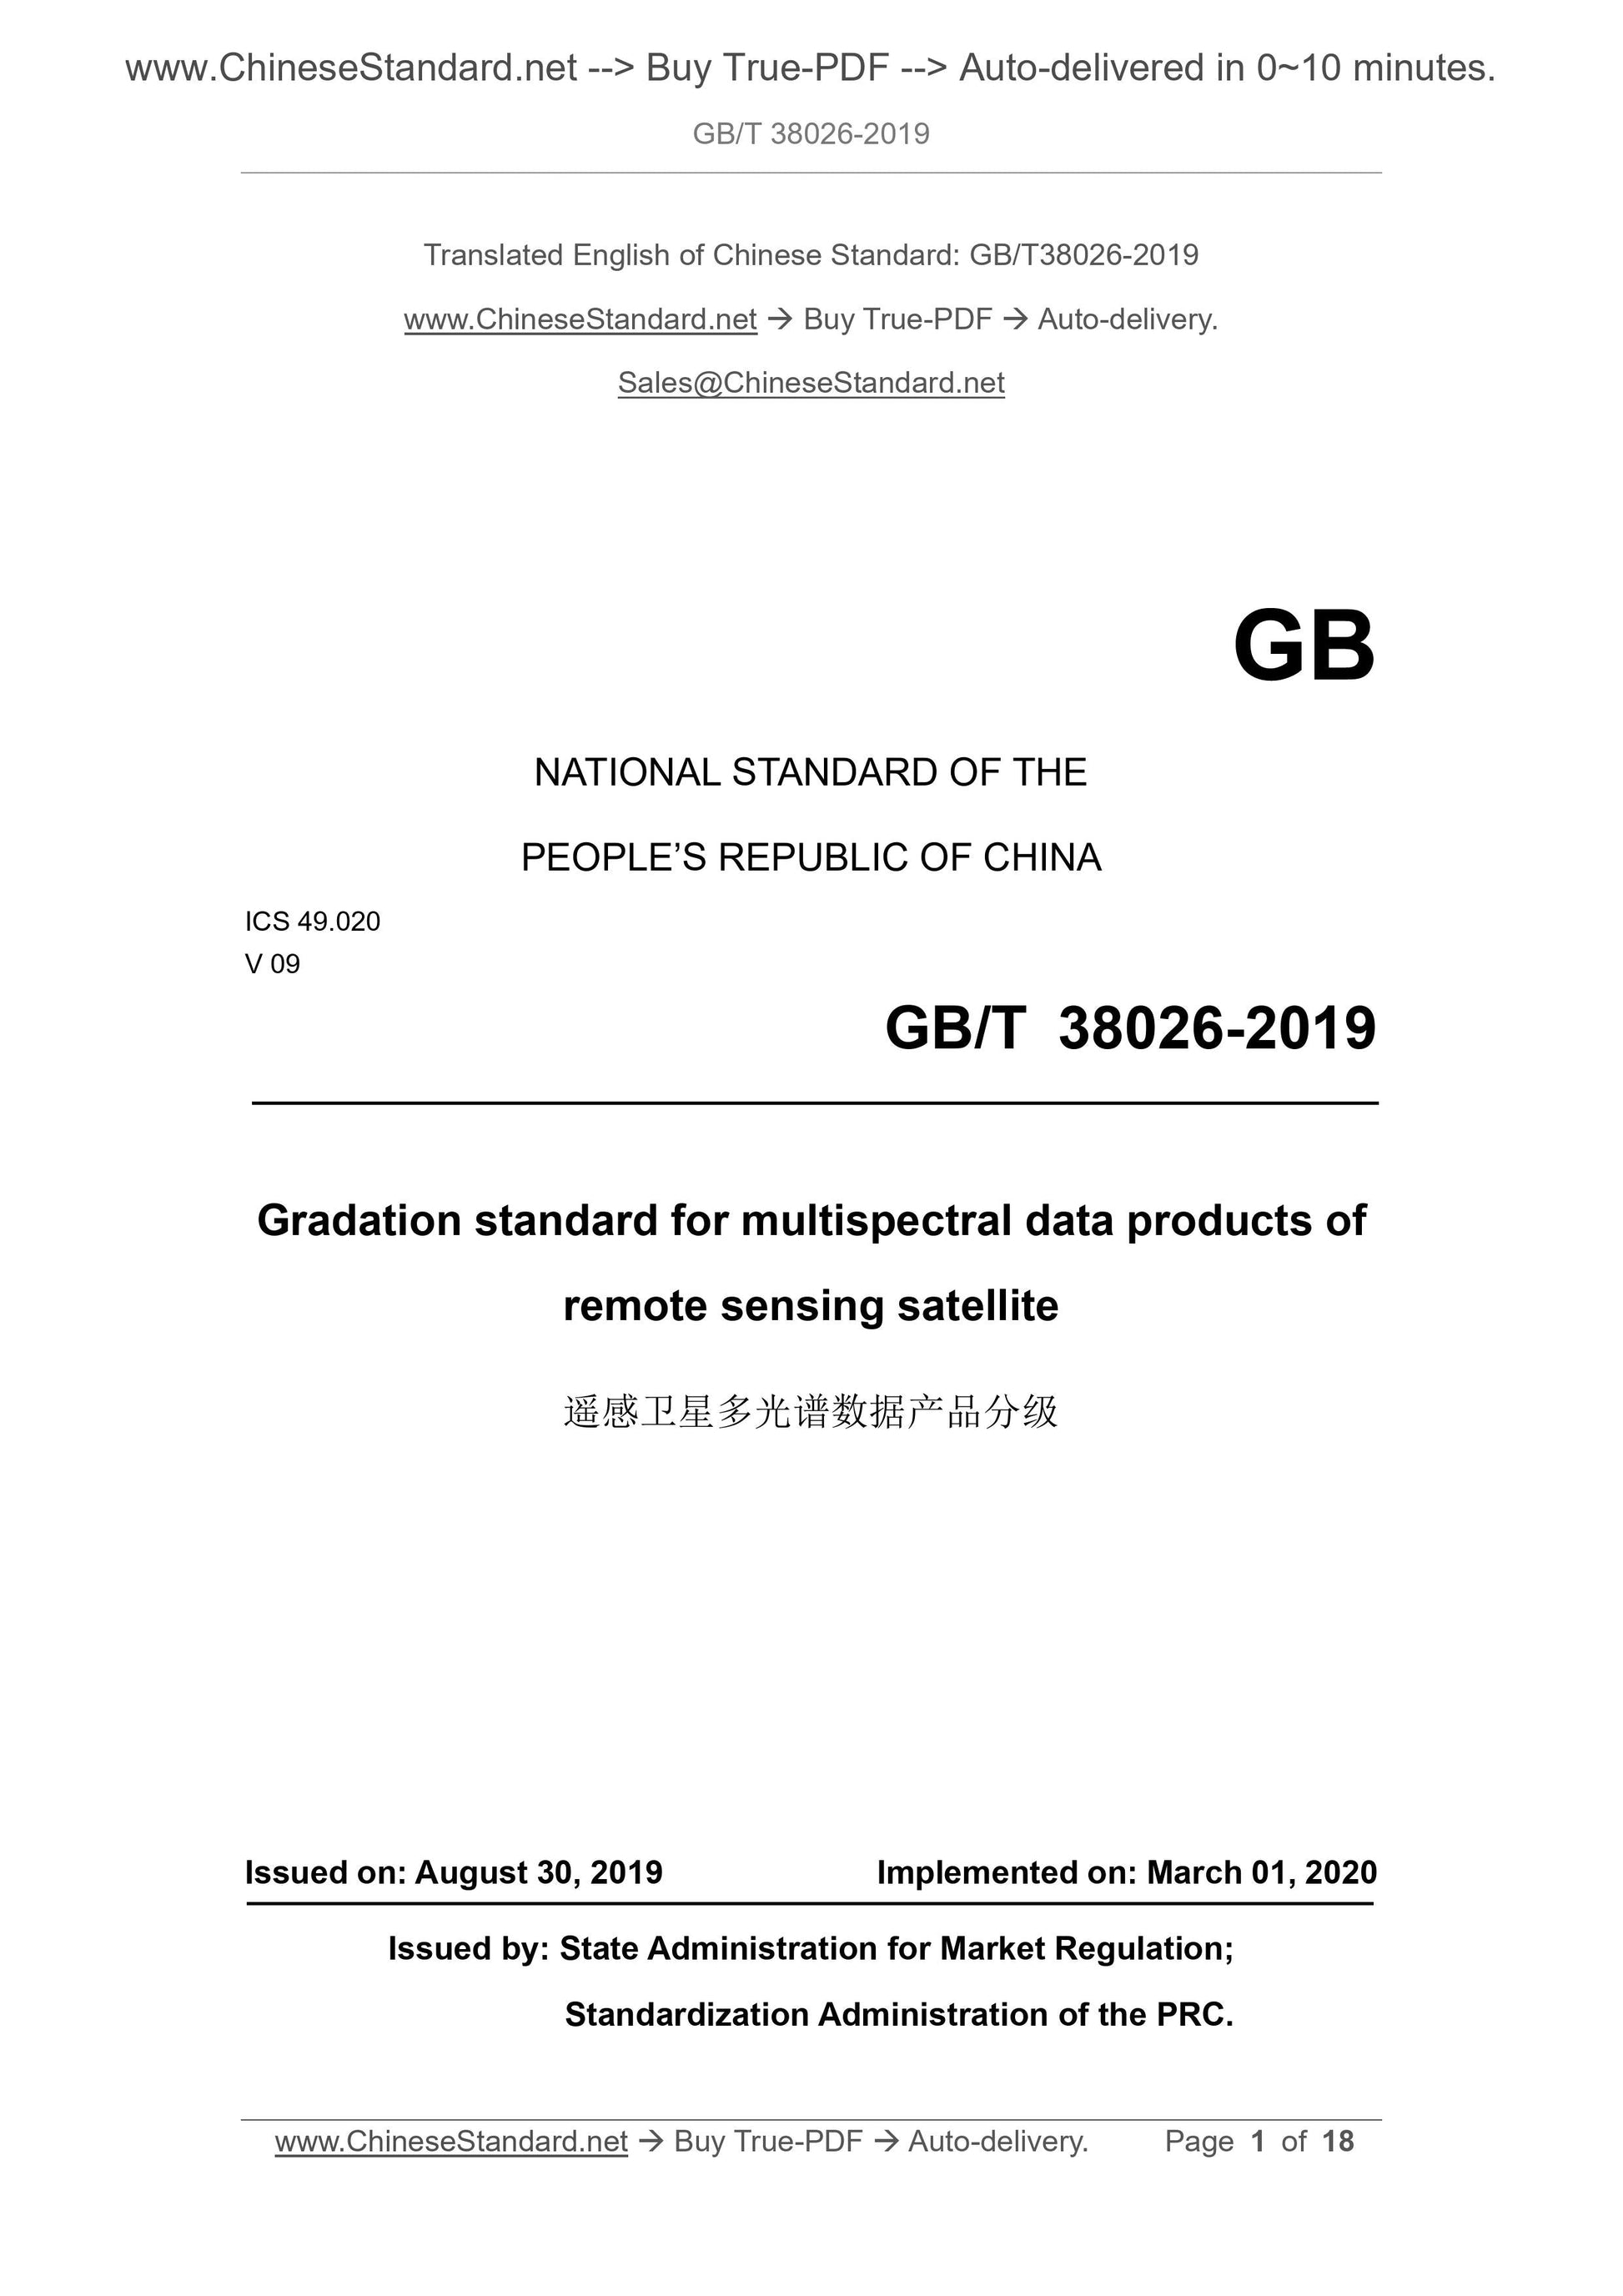 GB/T 38026-2019 Page 1